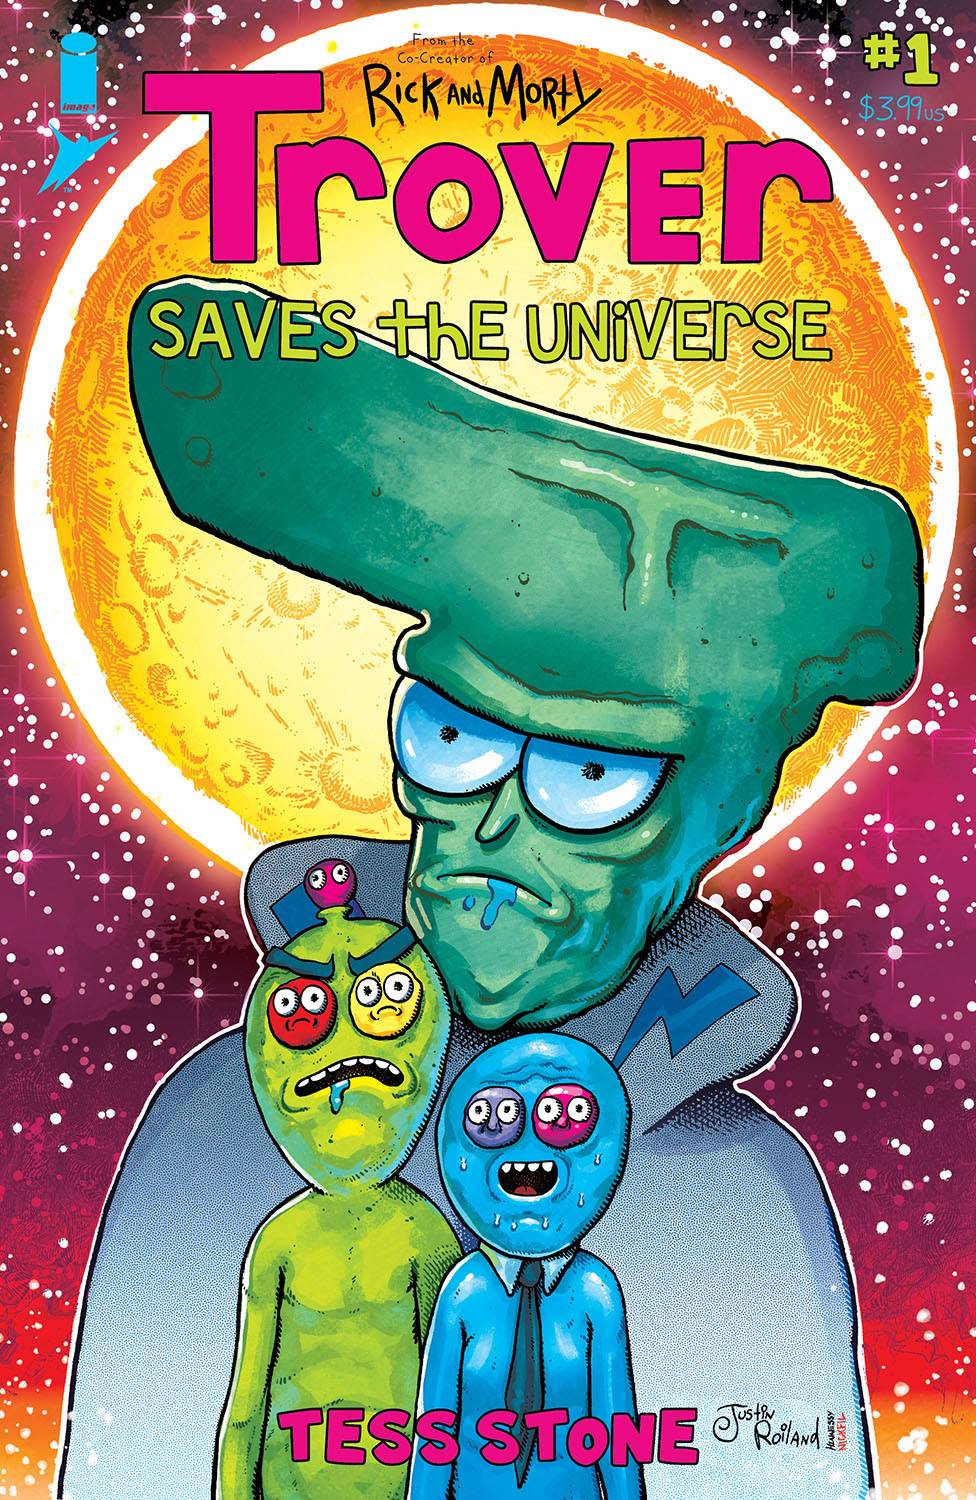 Trover Saves the Universe #1, Roiland & Stone Variant